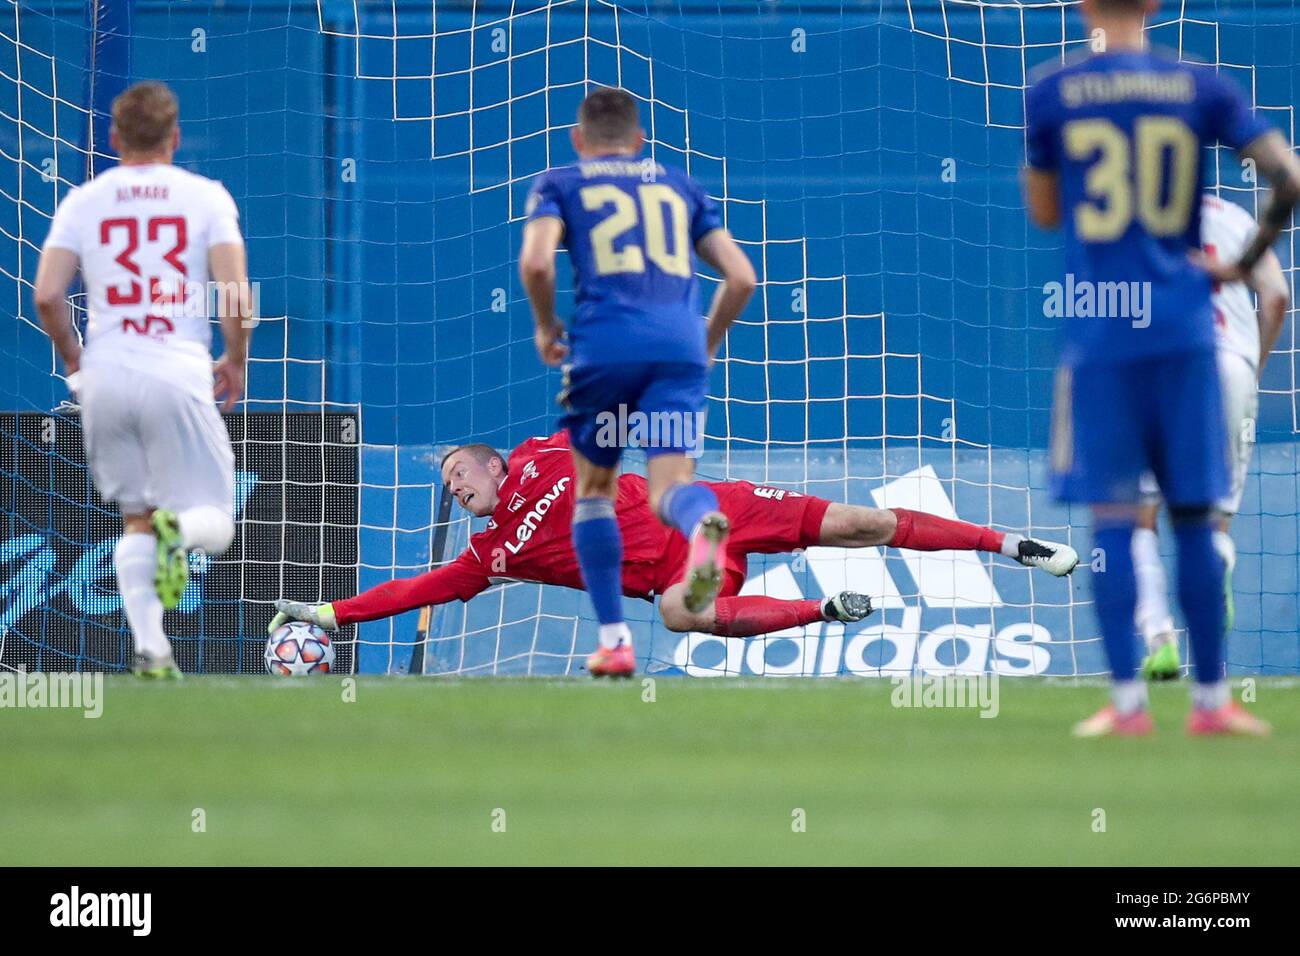 (210708) -- ZAGREB, July 8, 2021 (Xinhua) -- Valur's goalkeeper Hannes Halldorsson makes a save during the UEFA Champions League First Qualifying Round match between Dinamo Zagreb and Valur at Maksimir Stadium in Zagreb, Croatia, July 7, 2021. (Goran Stanzl/Pixsell via Xinhua) Stock Photo